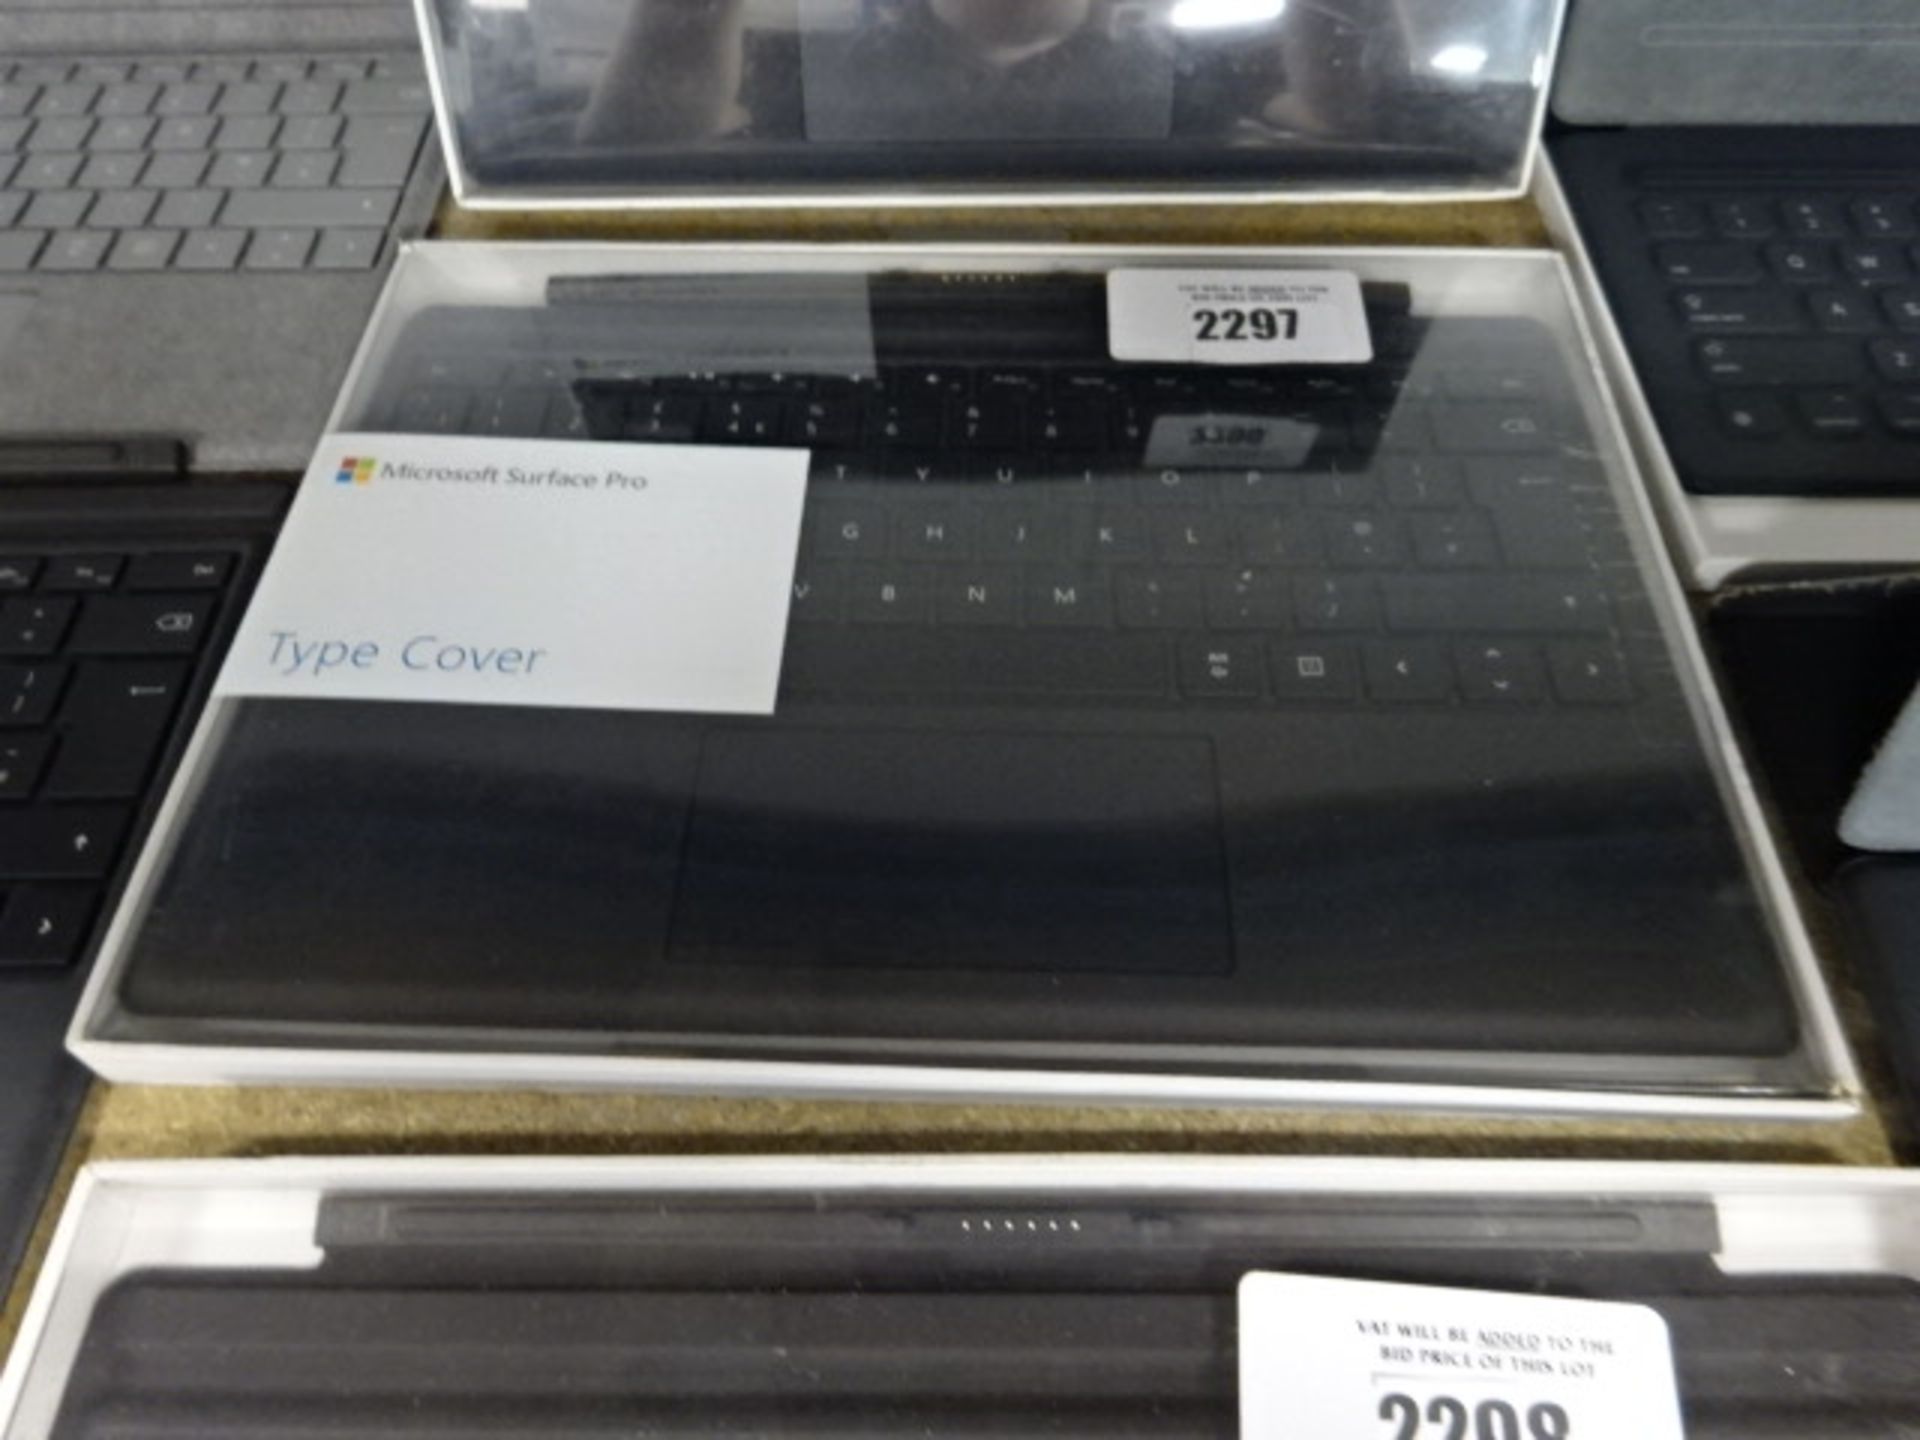 Microsoft Surface Pro type cover in box